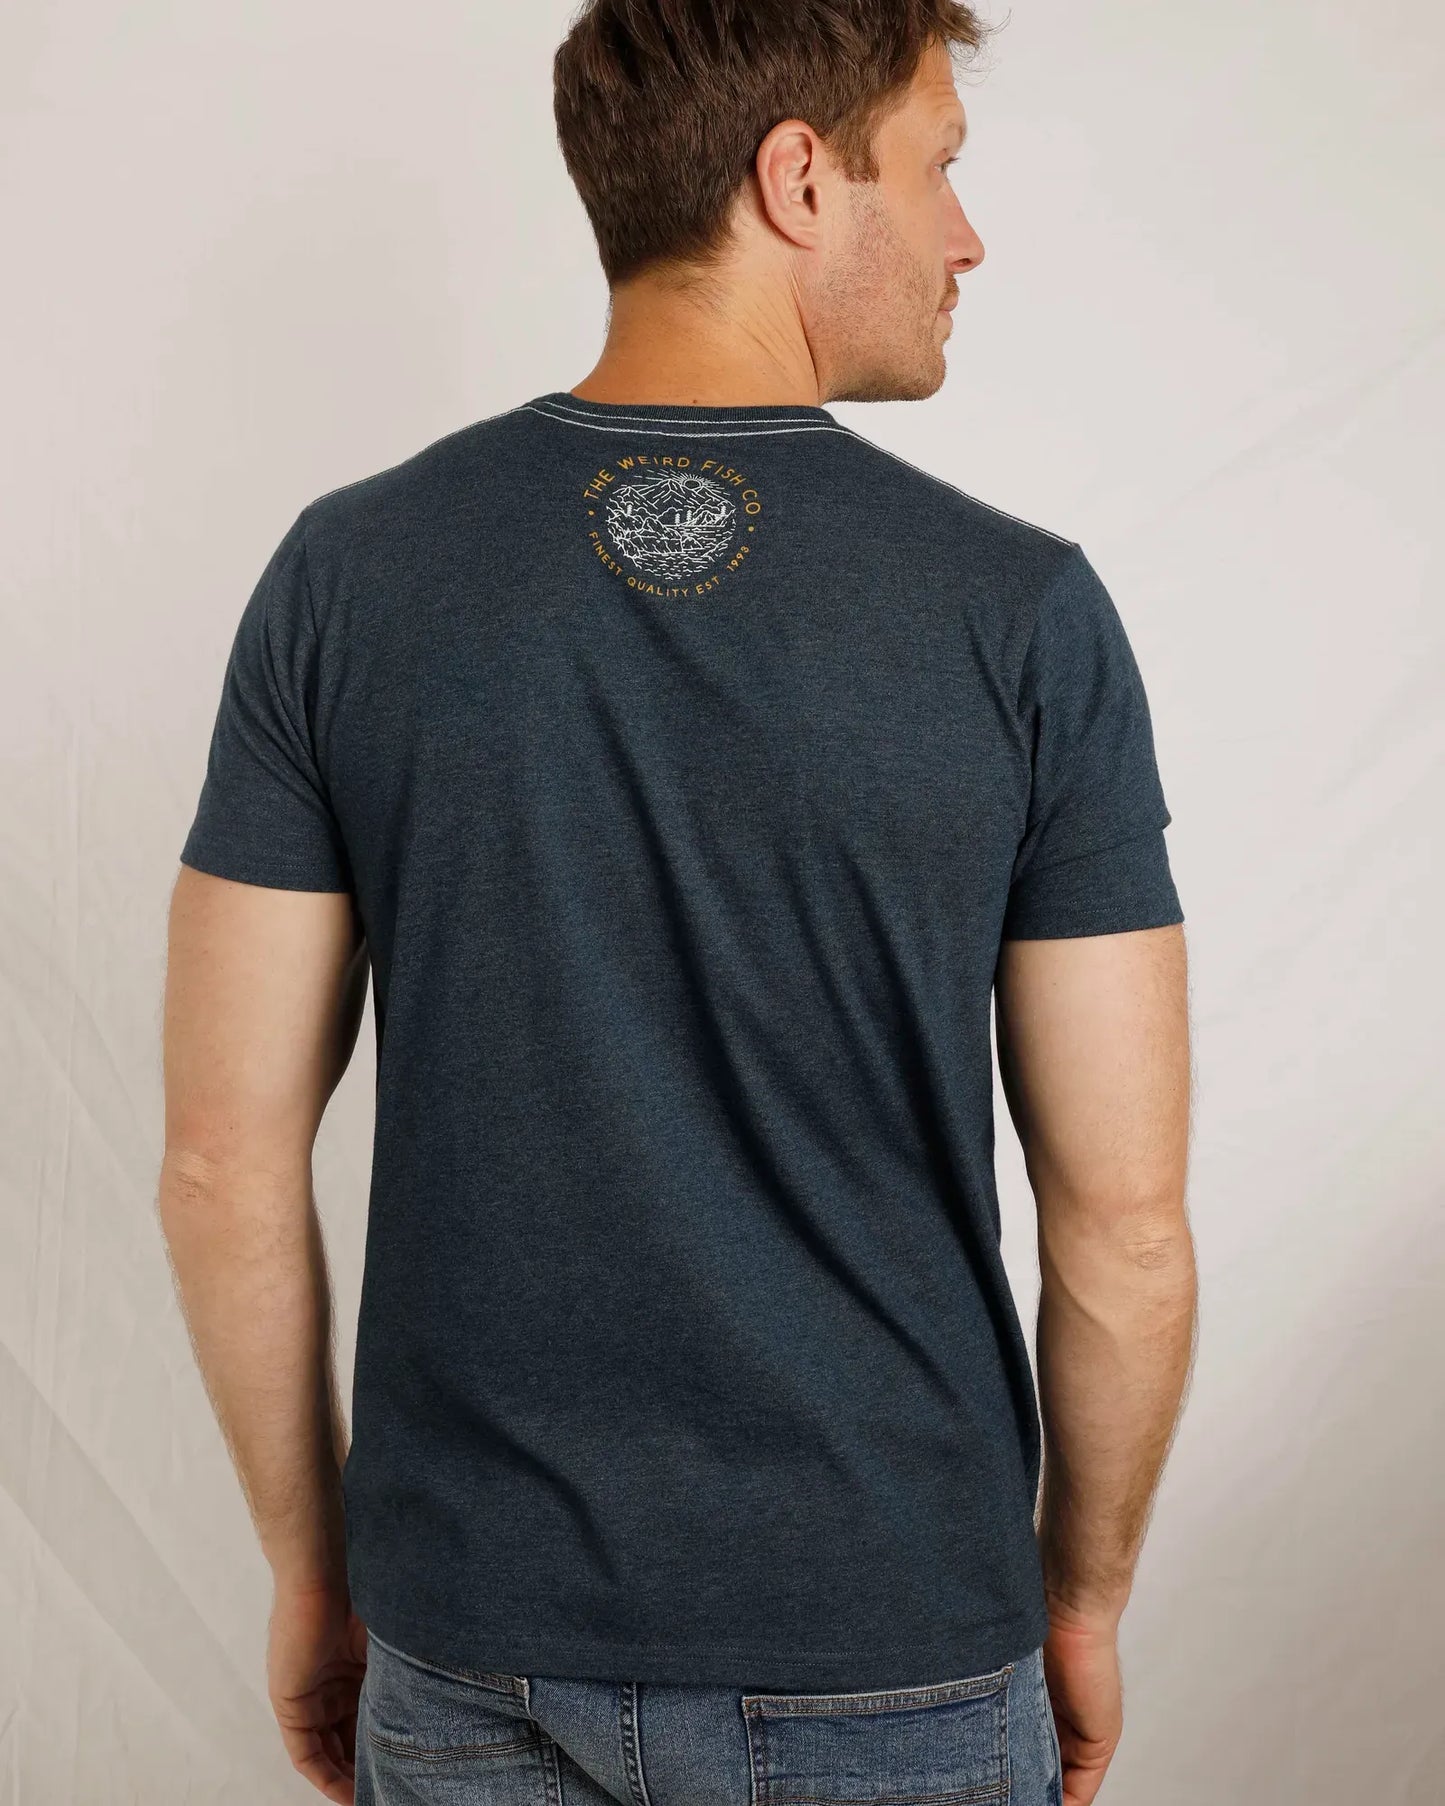 Lakes & Peaks Graphic T-Shirt - Navy